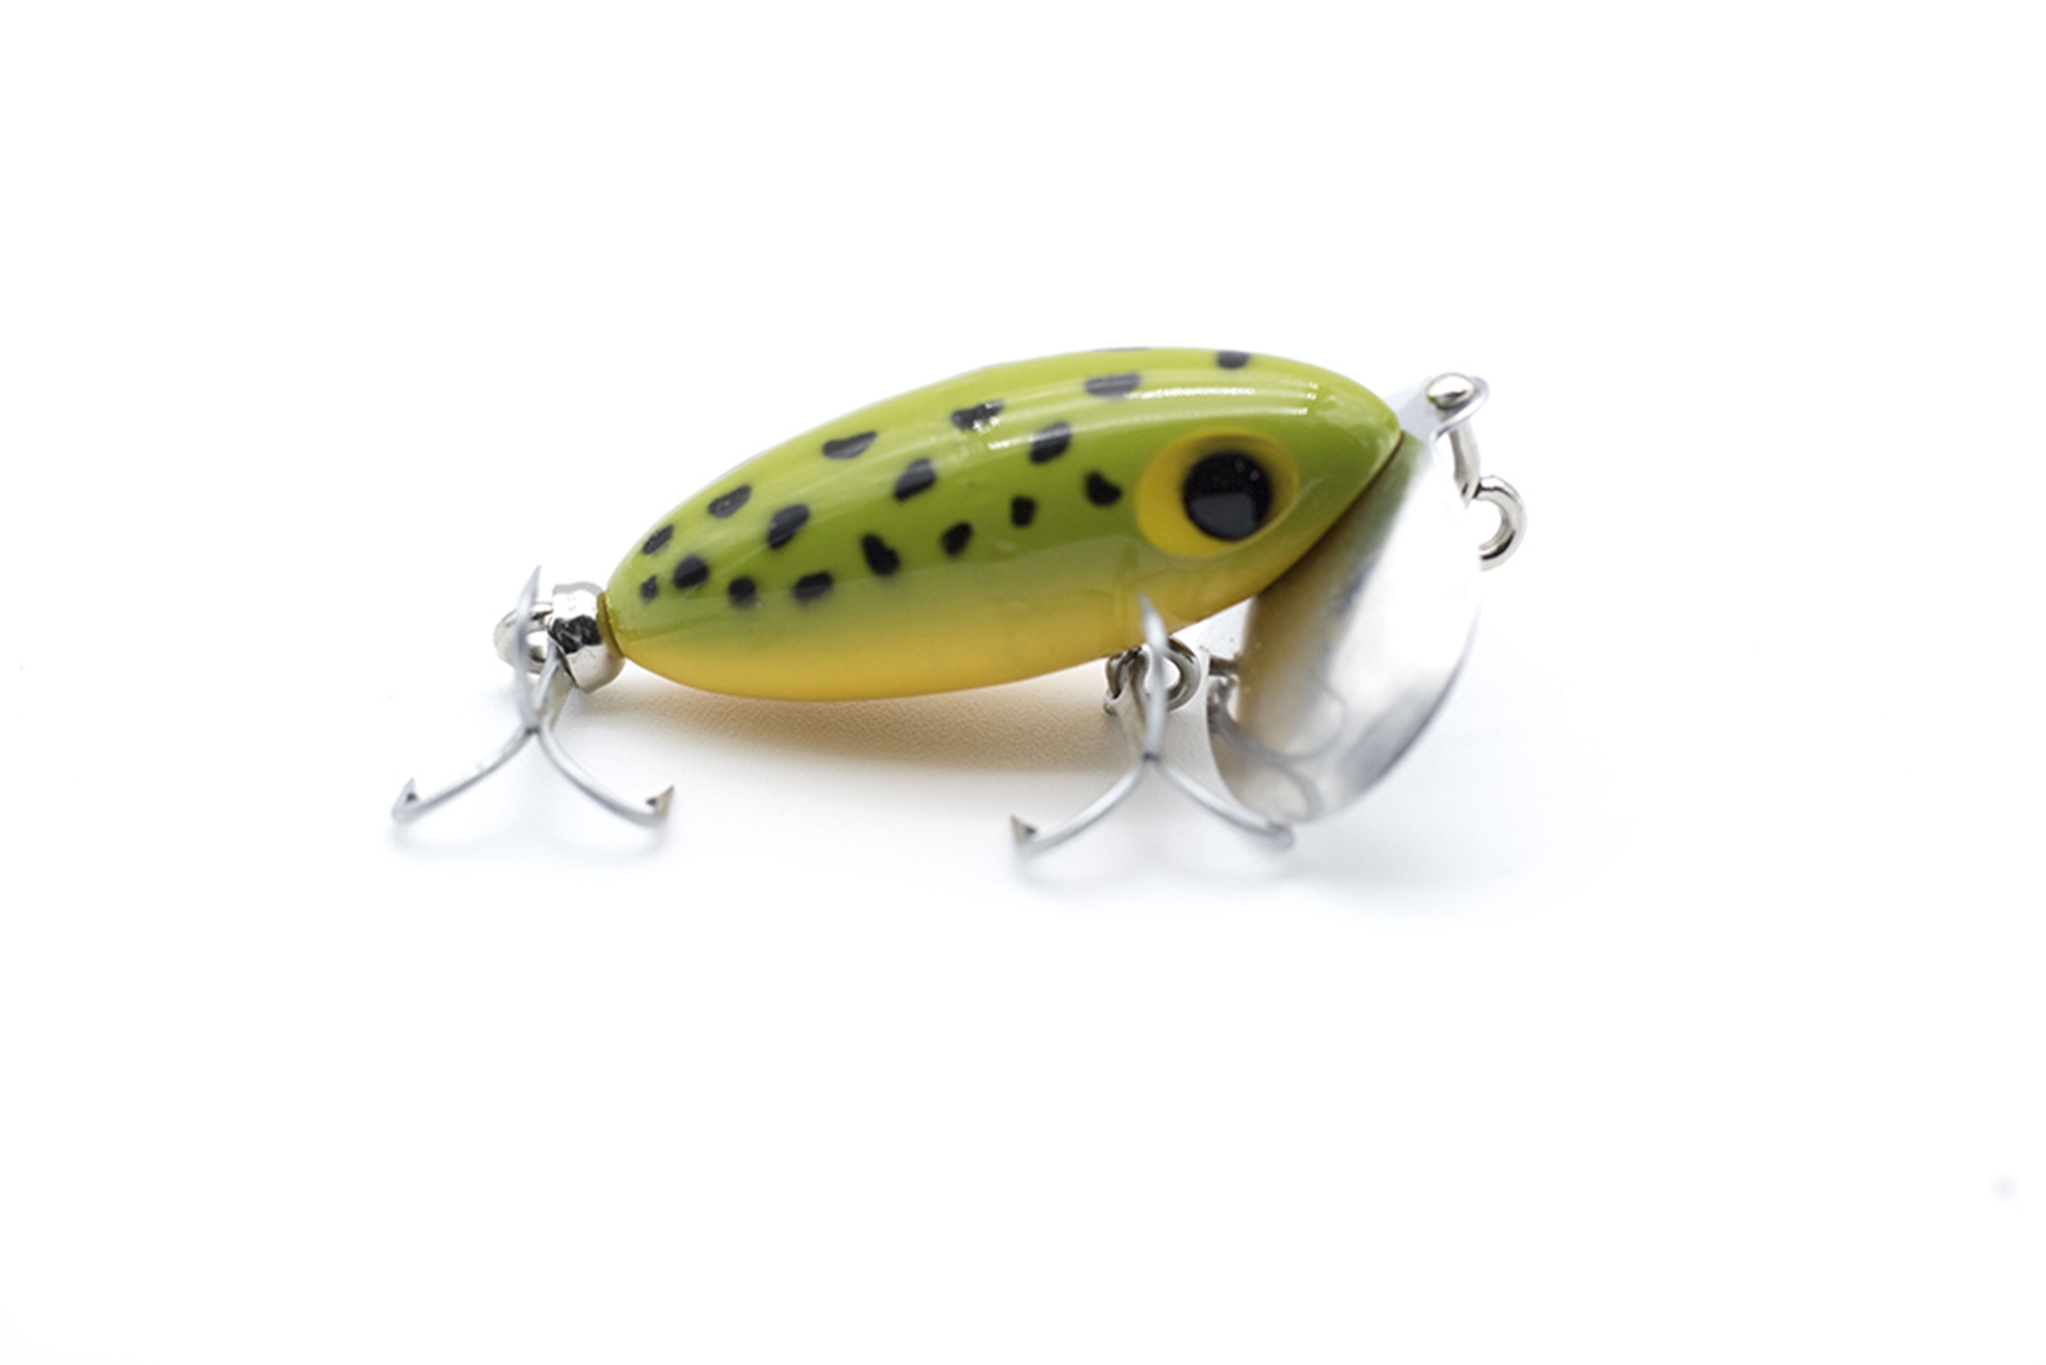 Arbogast G630-07 Jitterbug Topwater Fishing Lure 1/4 Ounce 